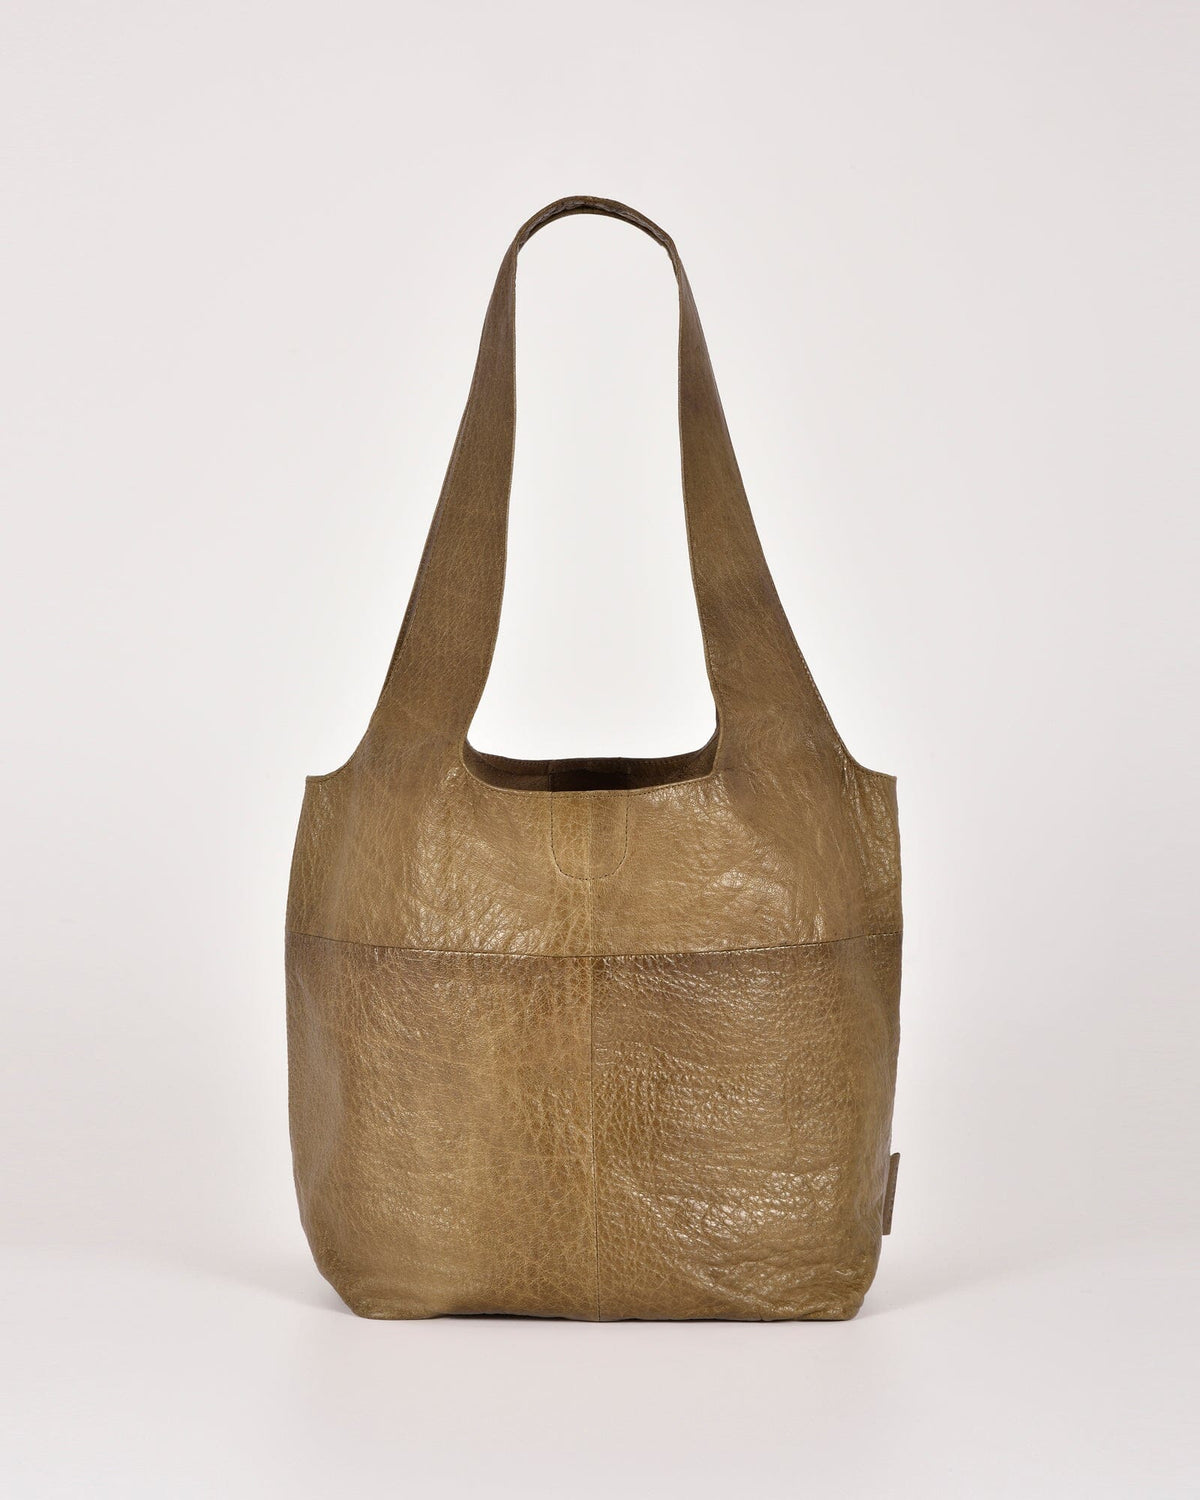 Sorell Soft Leather Tote